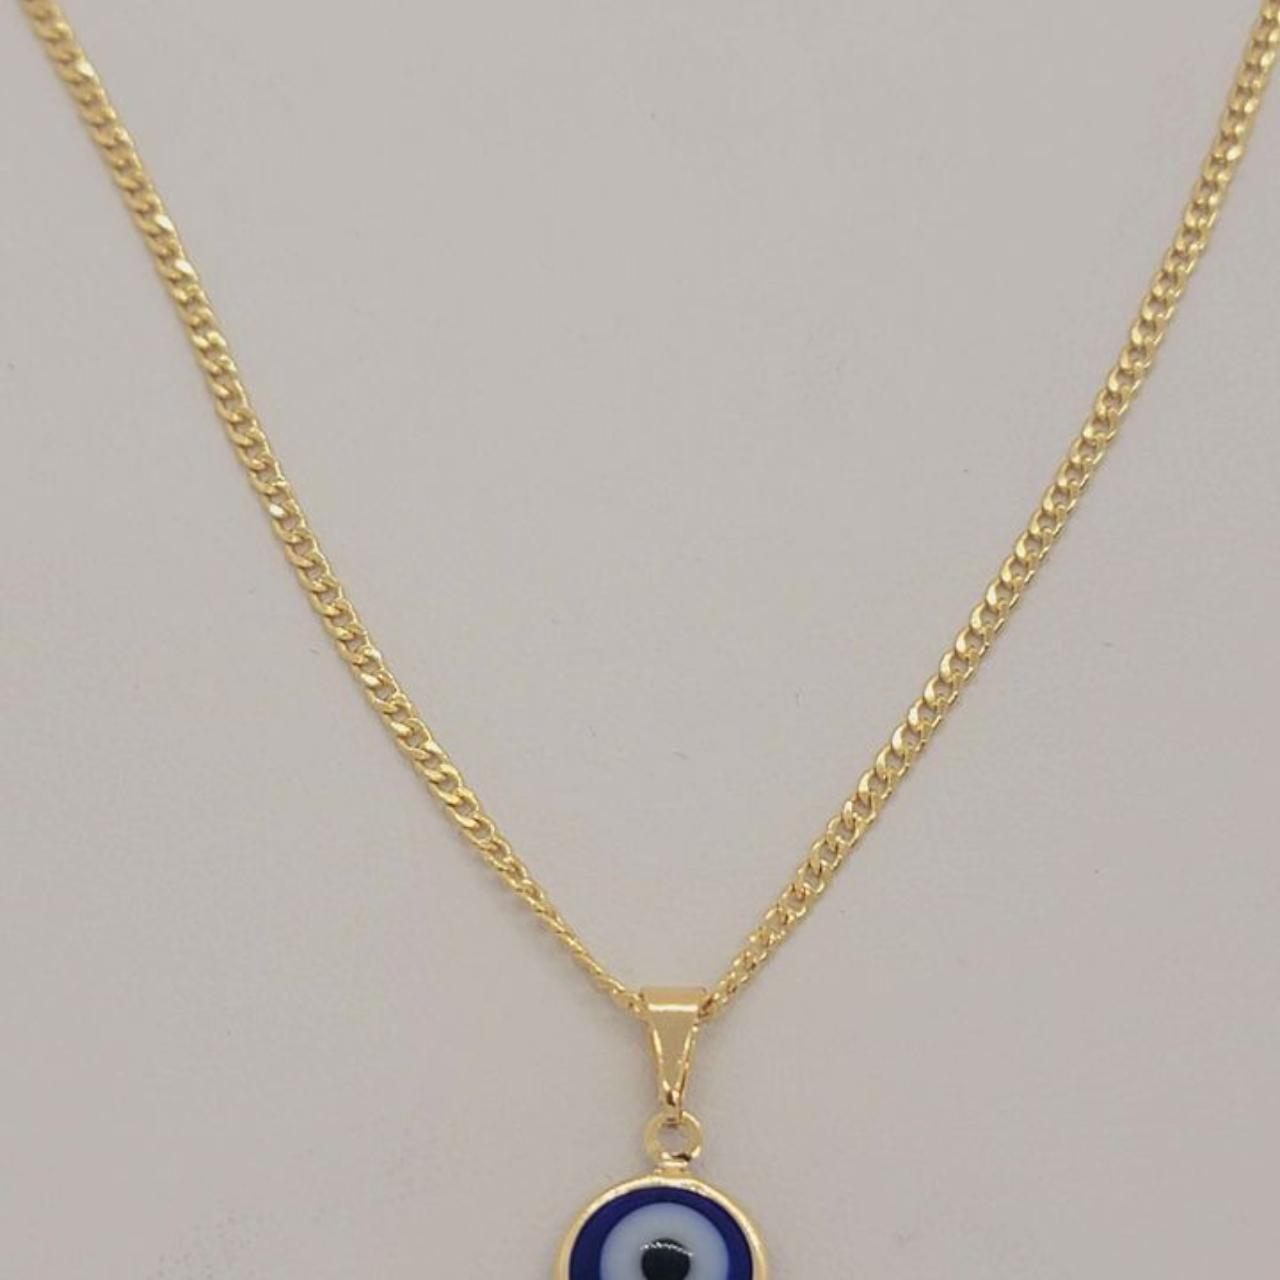 Women's Gold and Blue Jewellery